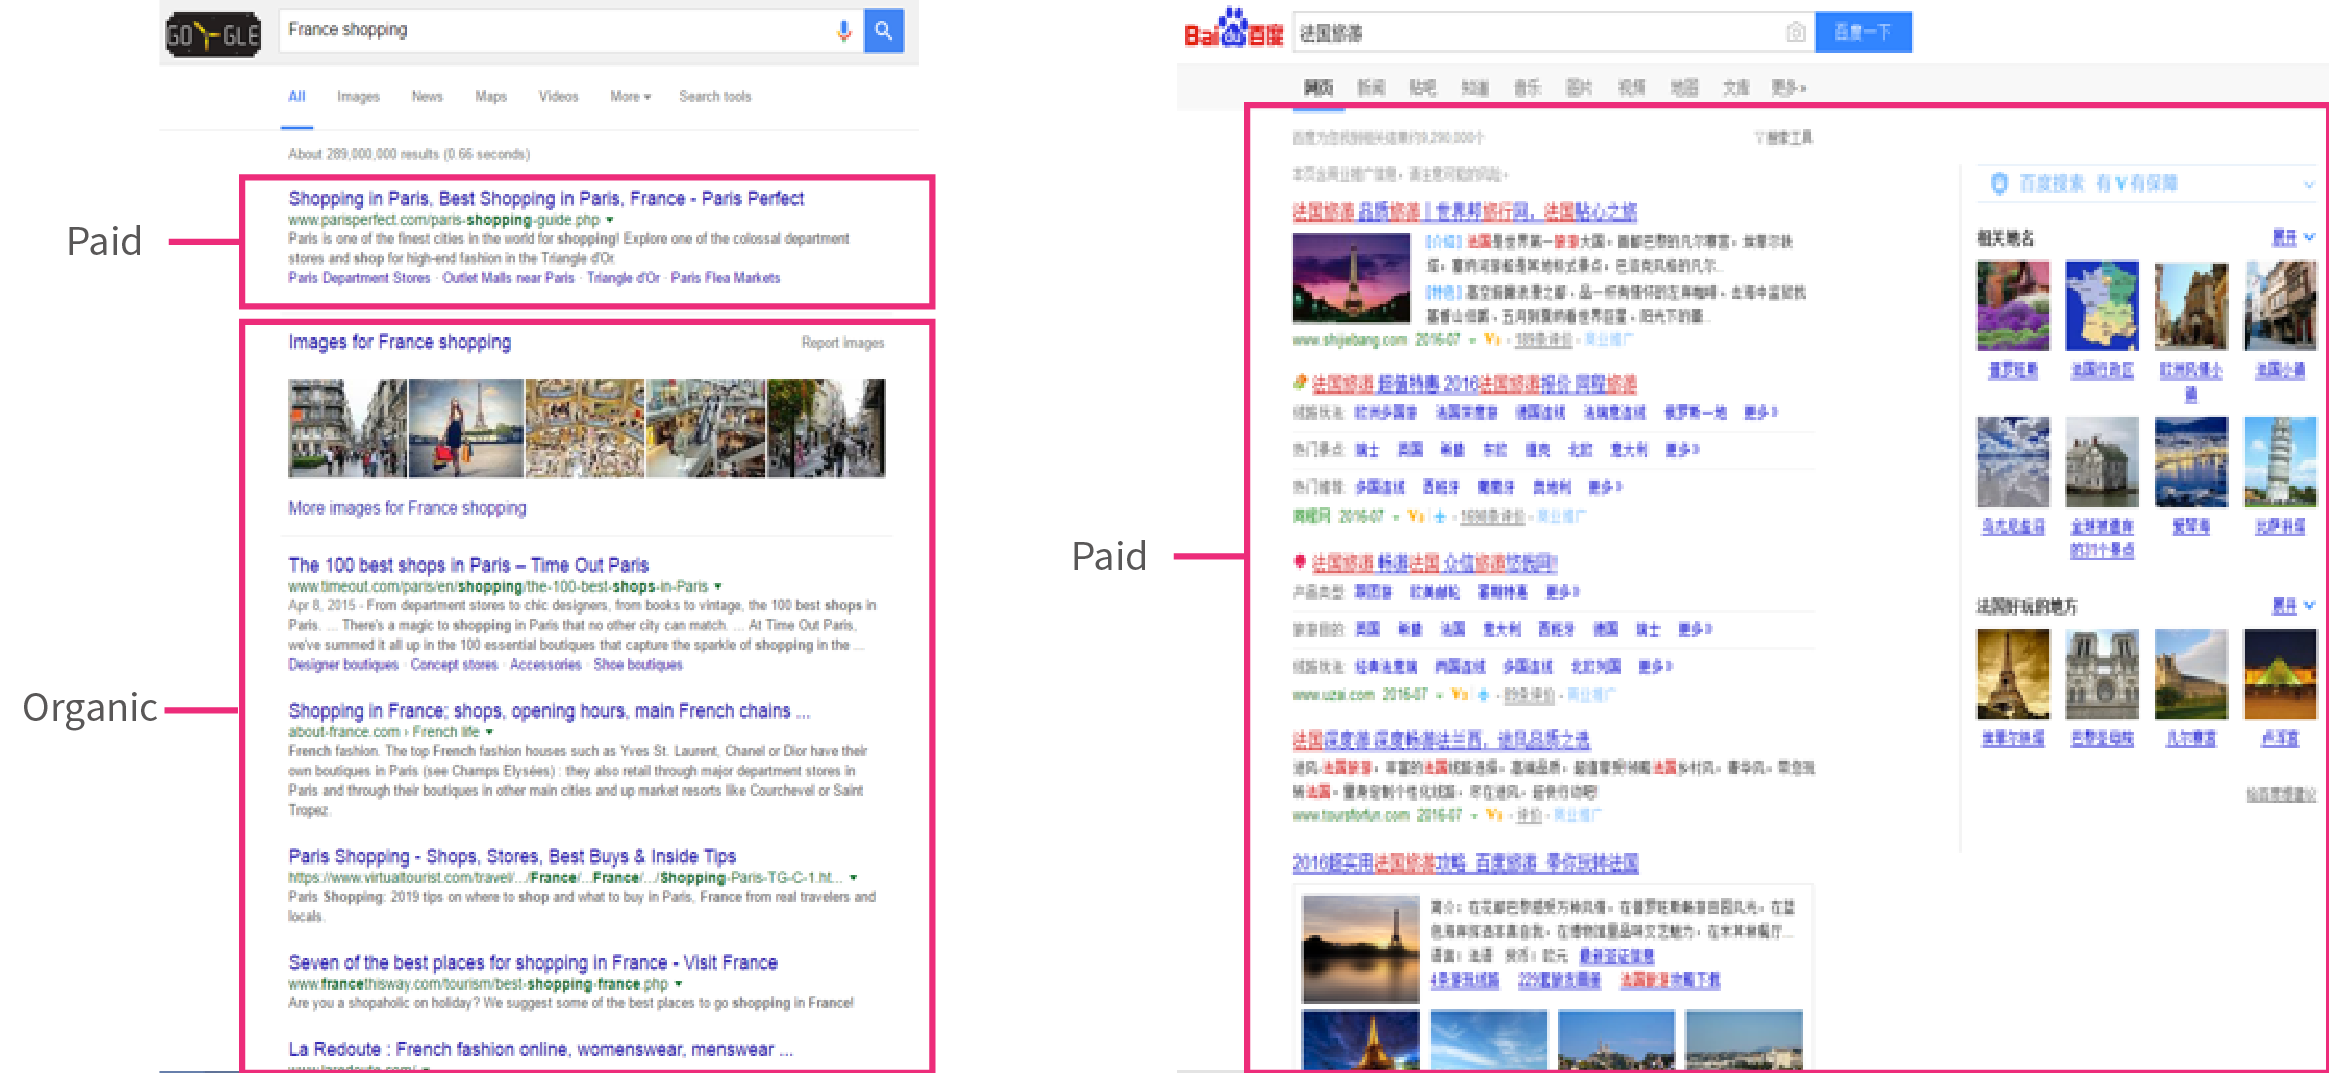 Examples of travel-related searches on Baidu compared to Google. Most Chinese travelers do extensive online research of the destinations (and the shopping options there) before heading on their trips.